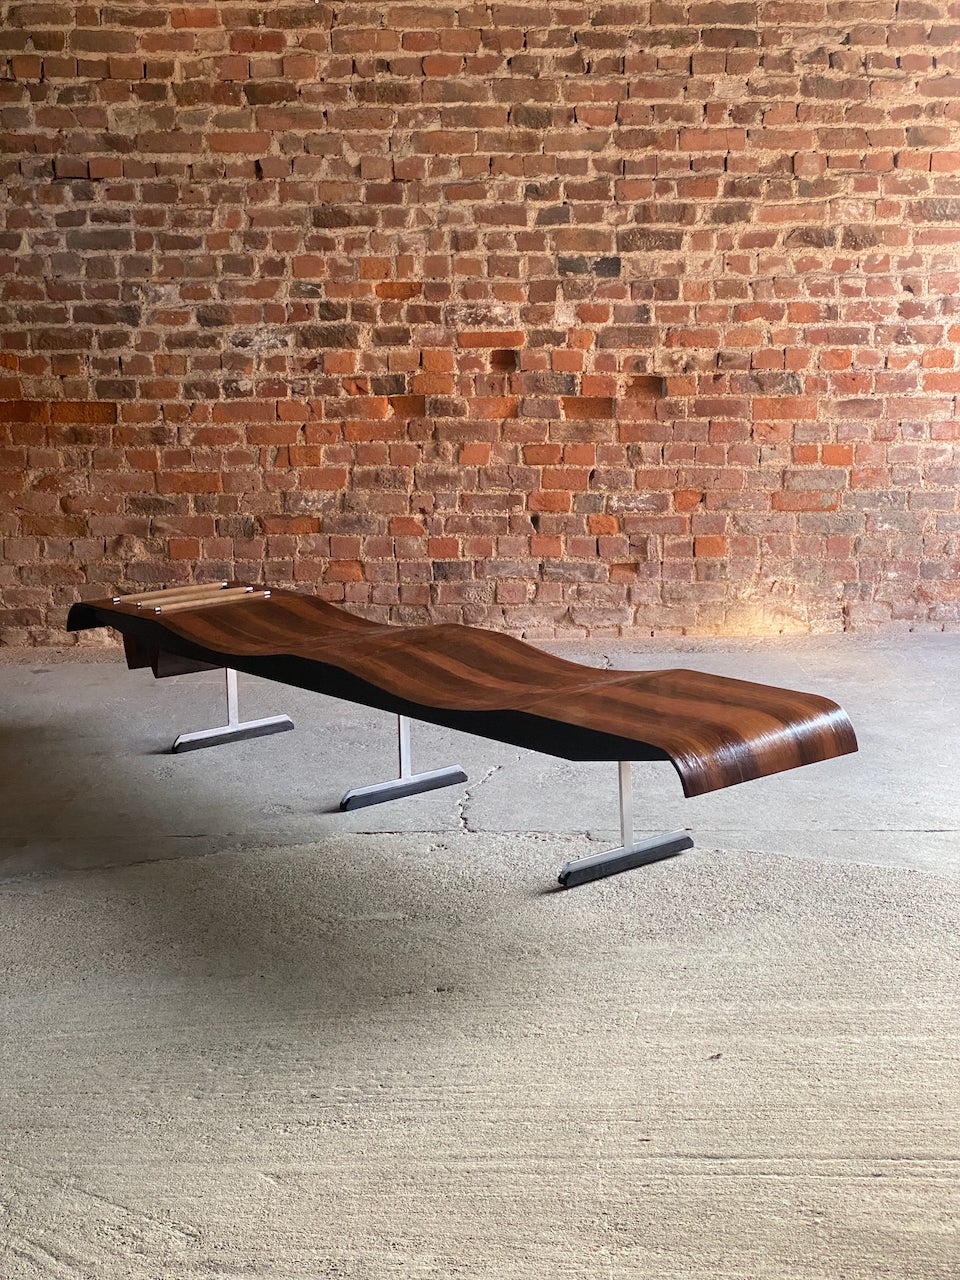 Jorge Zalszupin banco onda bench circa 1960s

Mid century Brazilian Modern Jorge Zalszupin ‘Banco Onda’ Bench circa 1960s, the Onda (literally meaning wave) showcases some of the finest characteristics of the designer's greatest works, with the